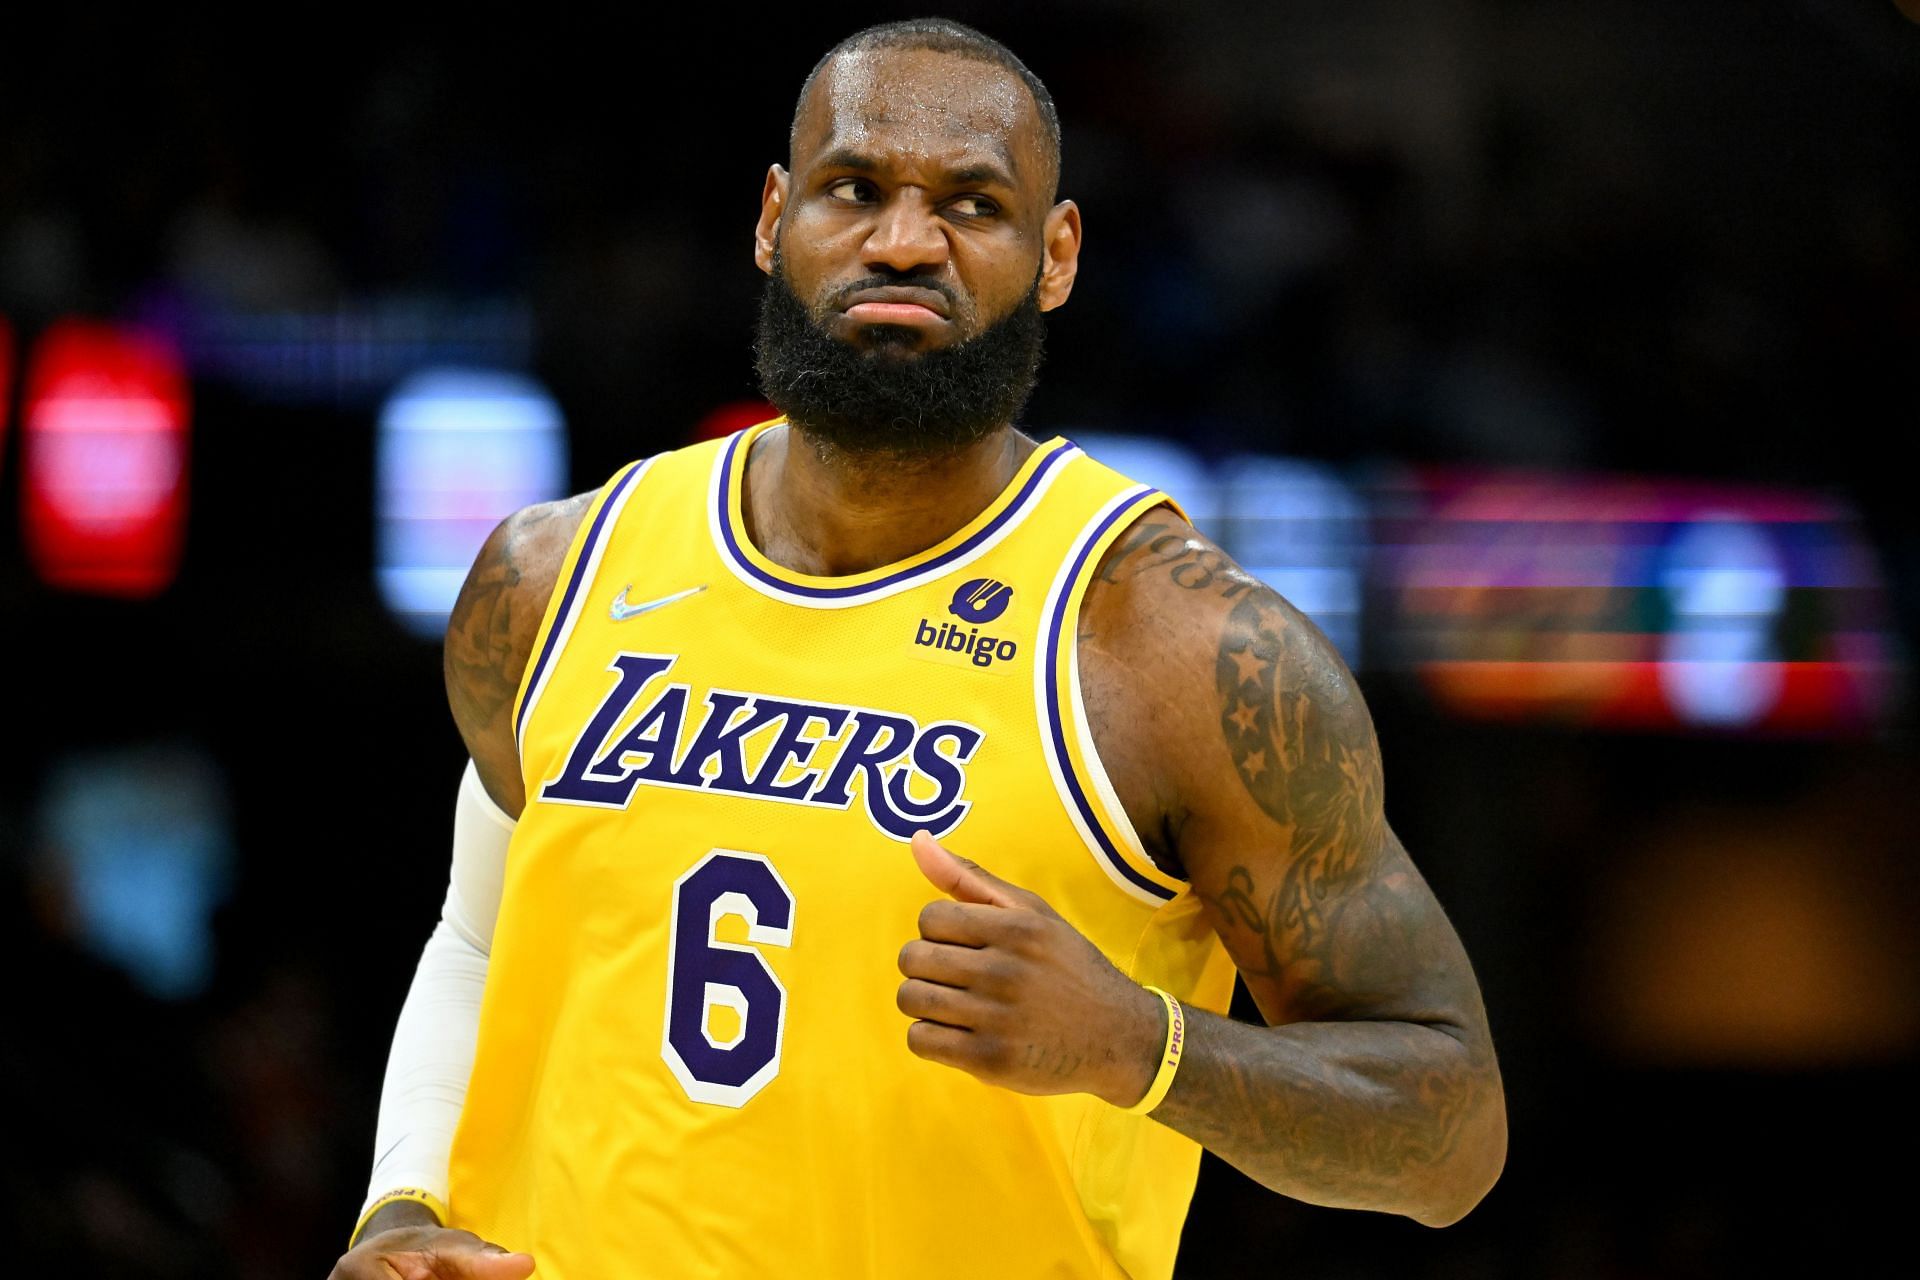 LeBron James #6 of the Los Angeles Lakers celebrates during the fourth quarter against the Cleveland Cavaliers at Rocket Mortgage Fieldhouse on March 21, 2022 in Cleveland, Ohio. The Lakers defeated the Cavaliers 131-120.